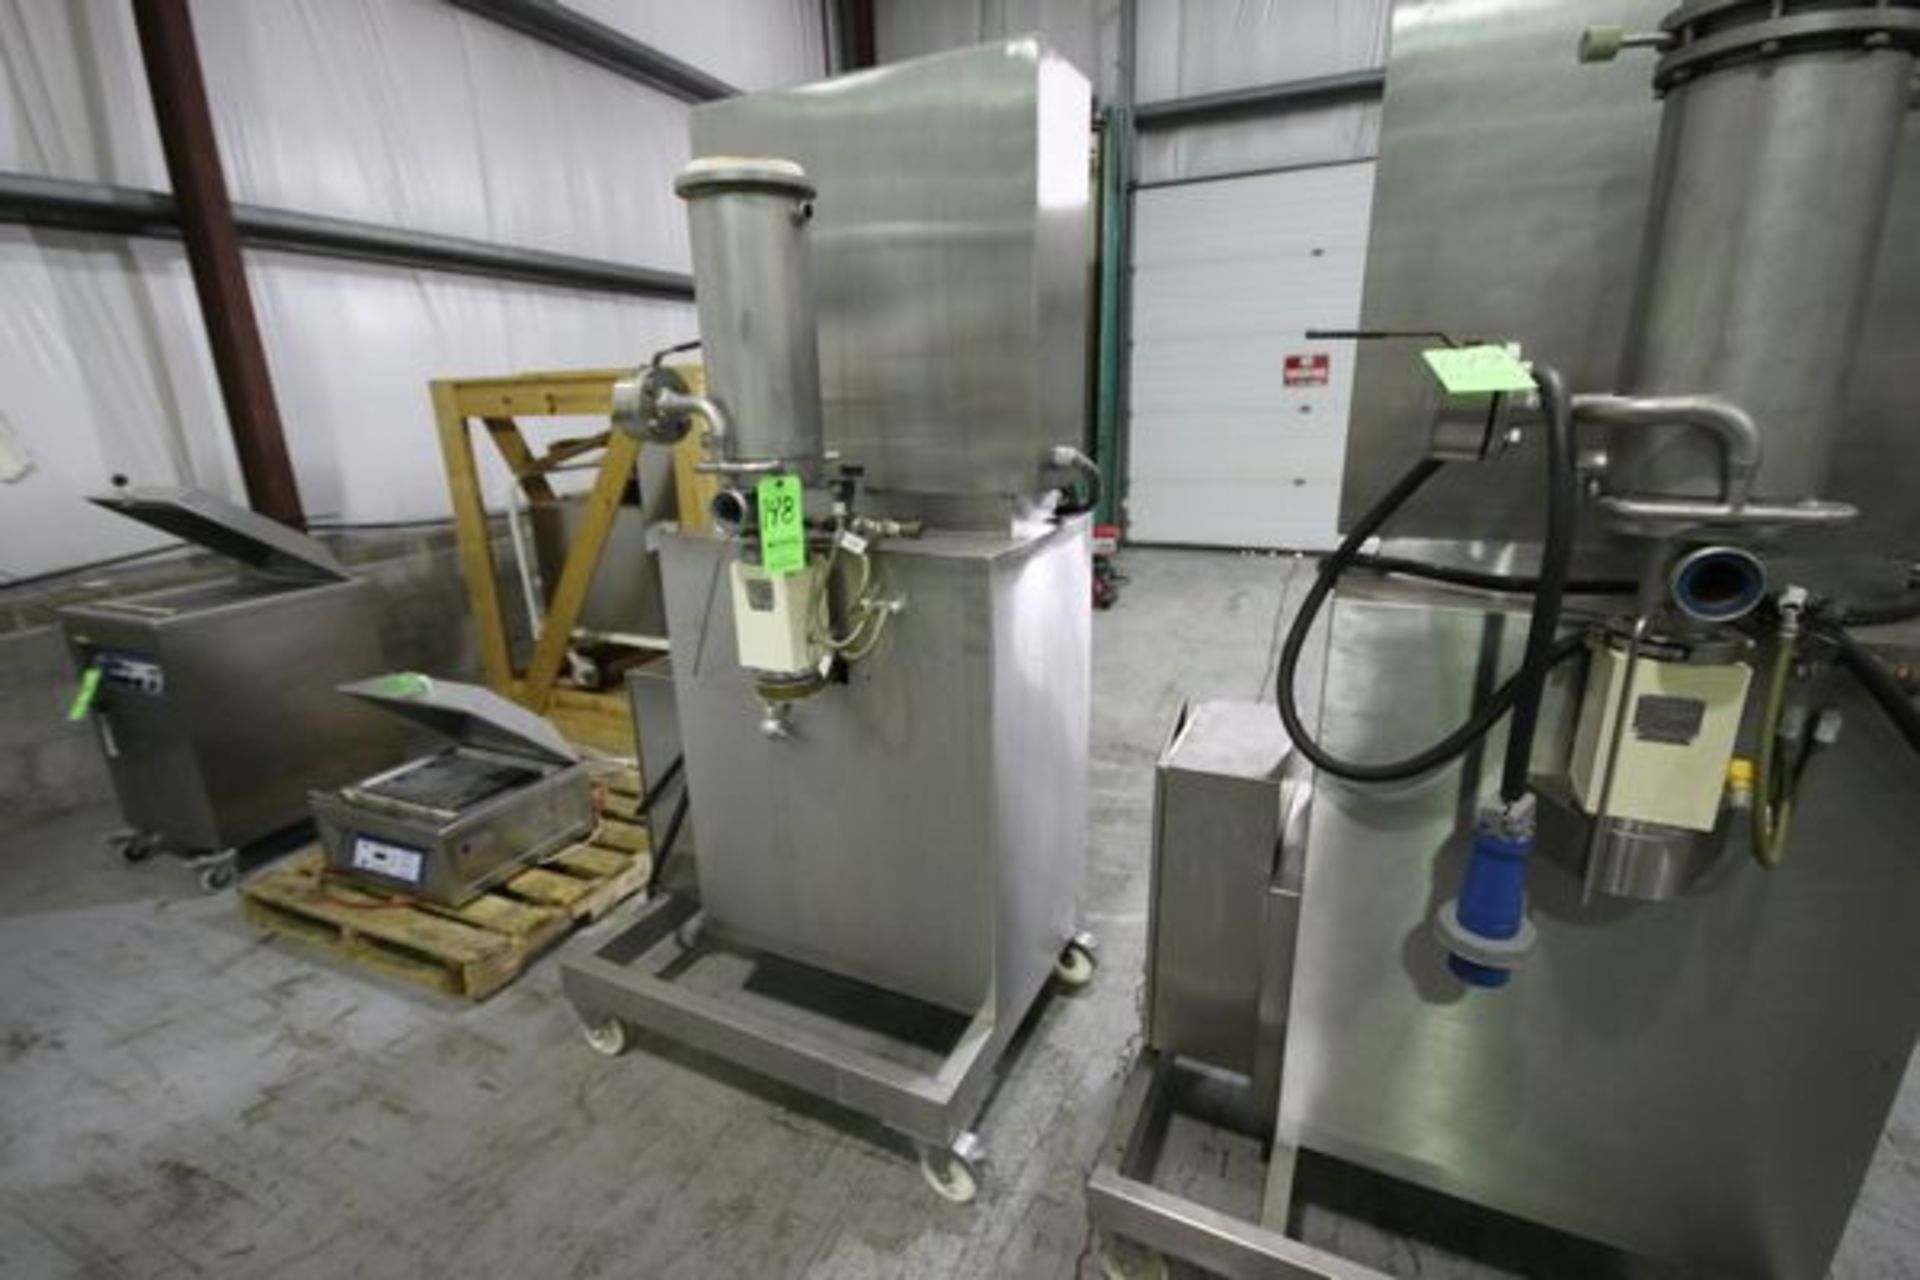 Burdosa Emulsfier Mixer, Model MISCHER GR80, S/N 2408020991 with Jacketed Mixing Chamber and Control